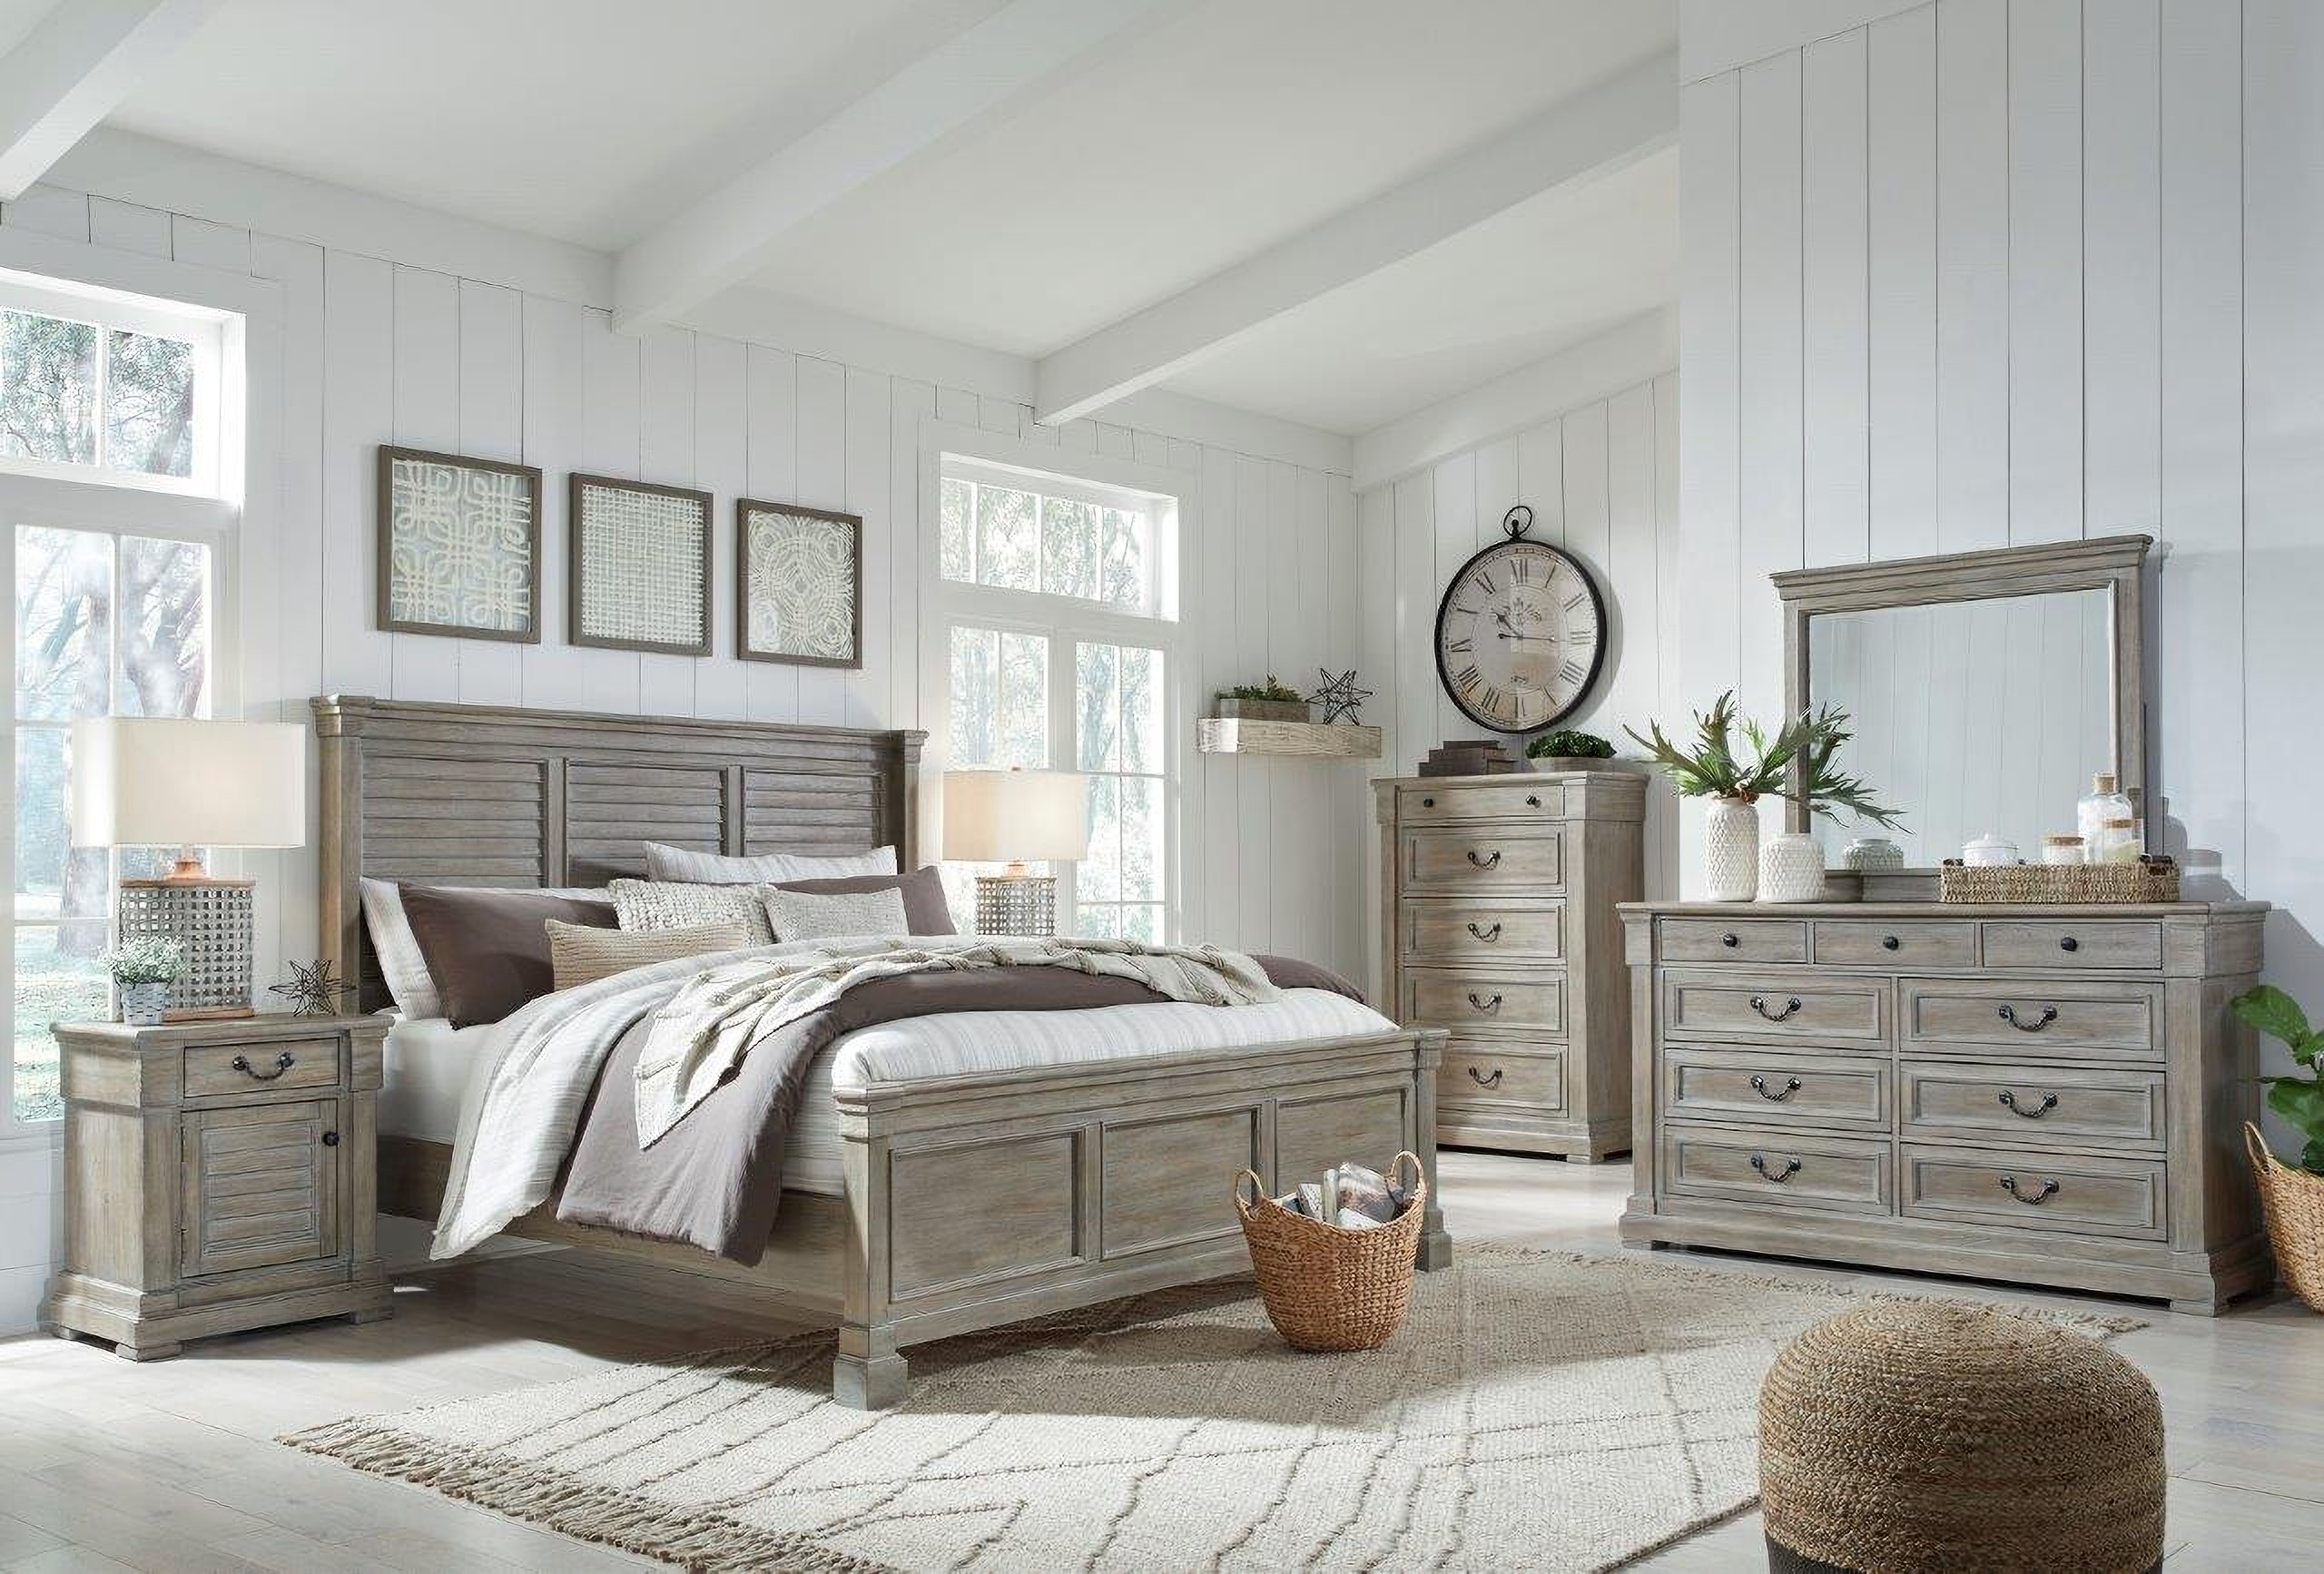 Coaster Baker 4-Piece California King Bedroom Set Brown and Light Taupe